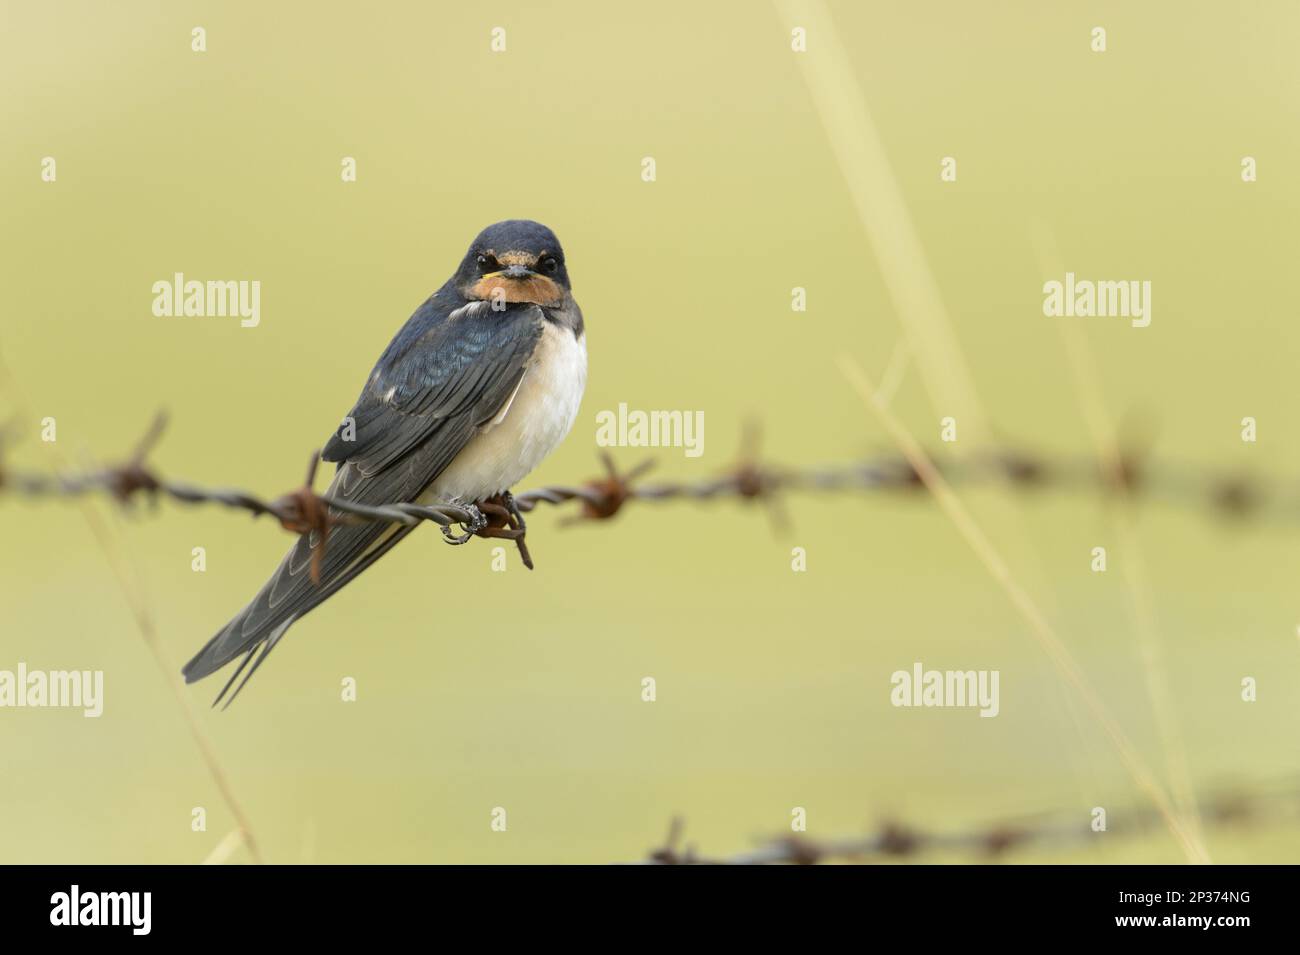 Barn Swallow, Barn Swallows, Songbirds, Animals, Birds, Swallows, Barn Swallow (Hirundo rustica rustica) adult, perched on barbed wire, Blithfield Stock Photo